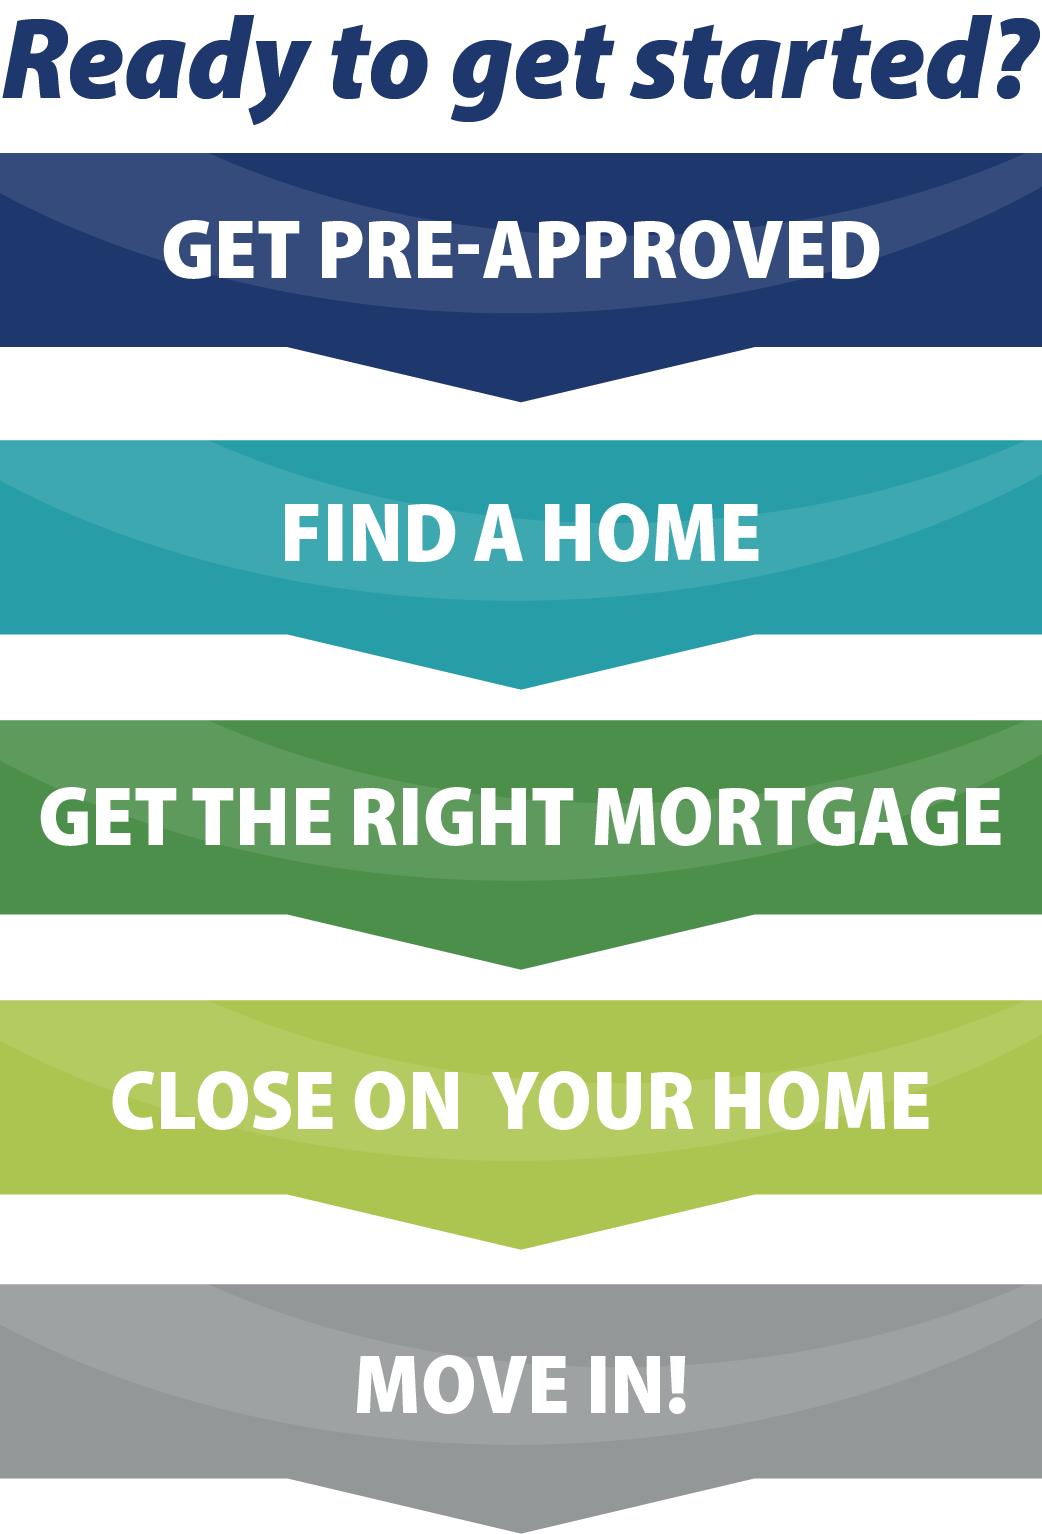 Mortgage steps image. Get pre-approved, find a home, get the right mortgage, close on your home, move in.